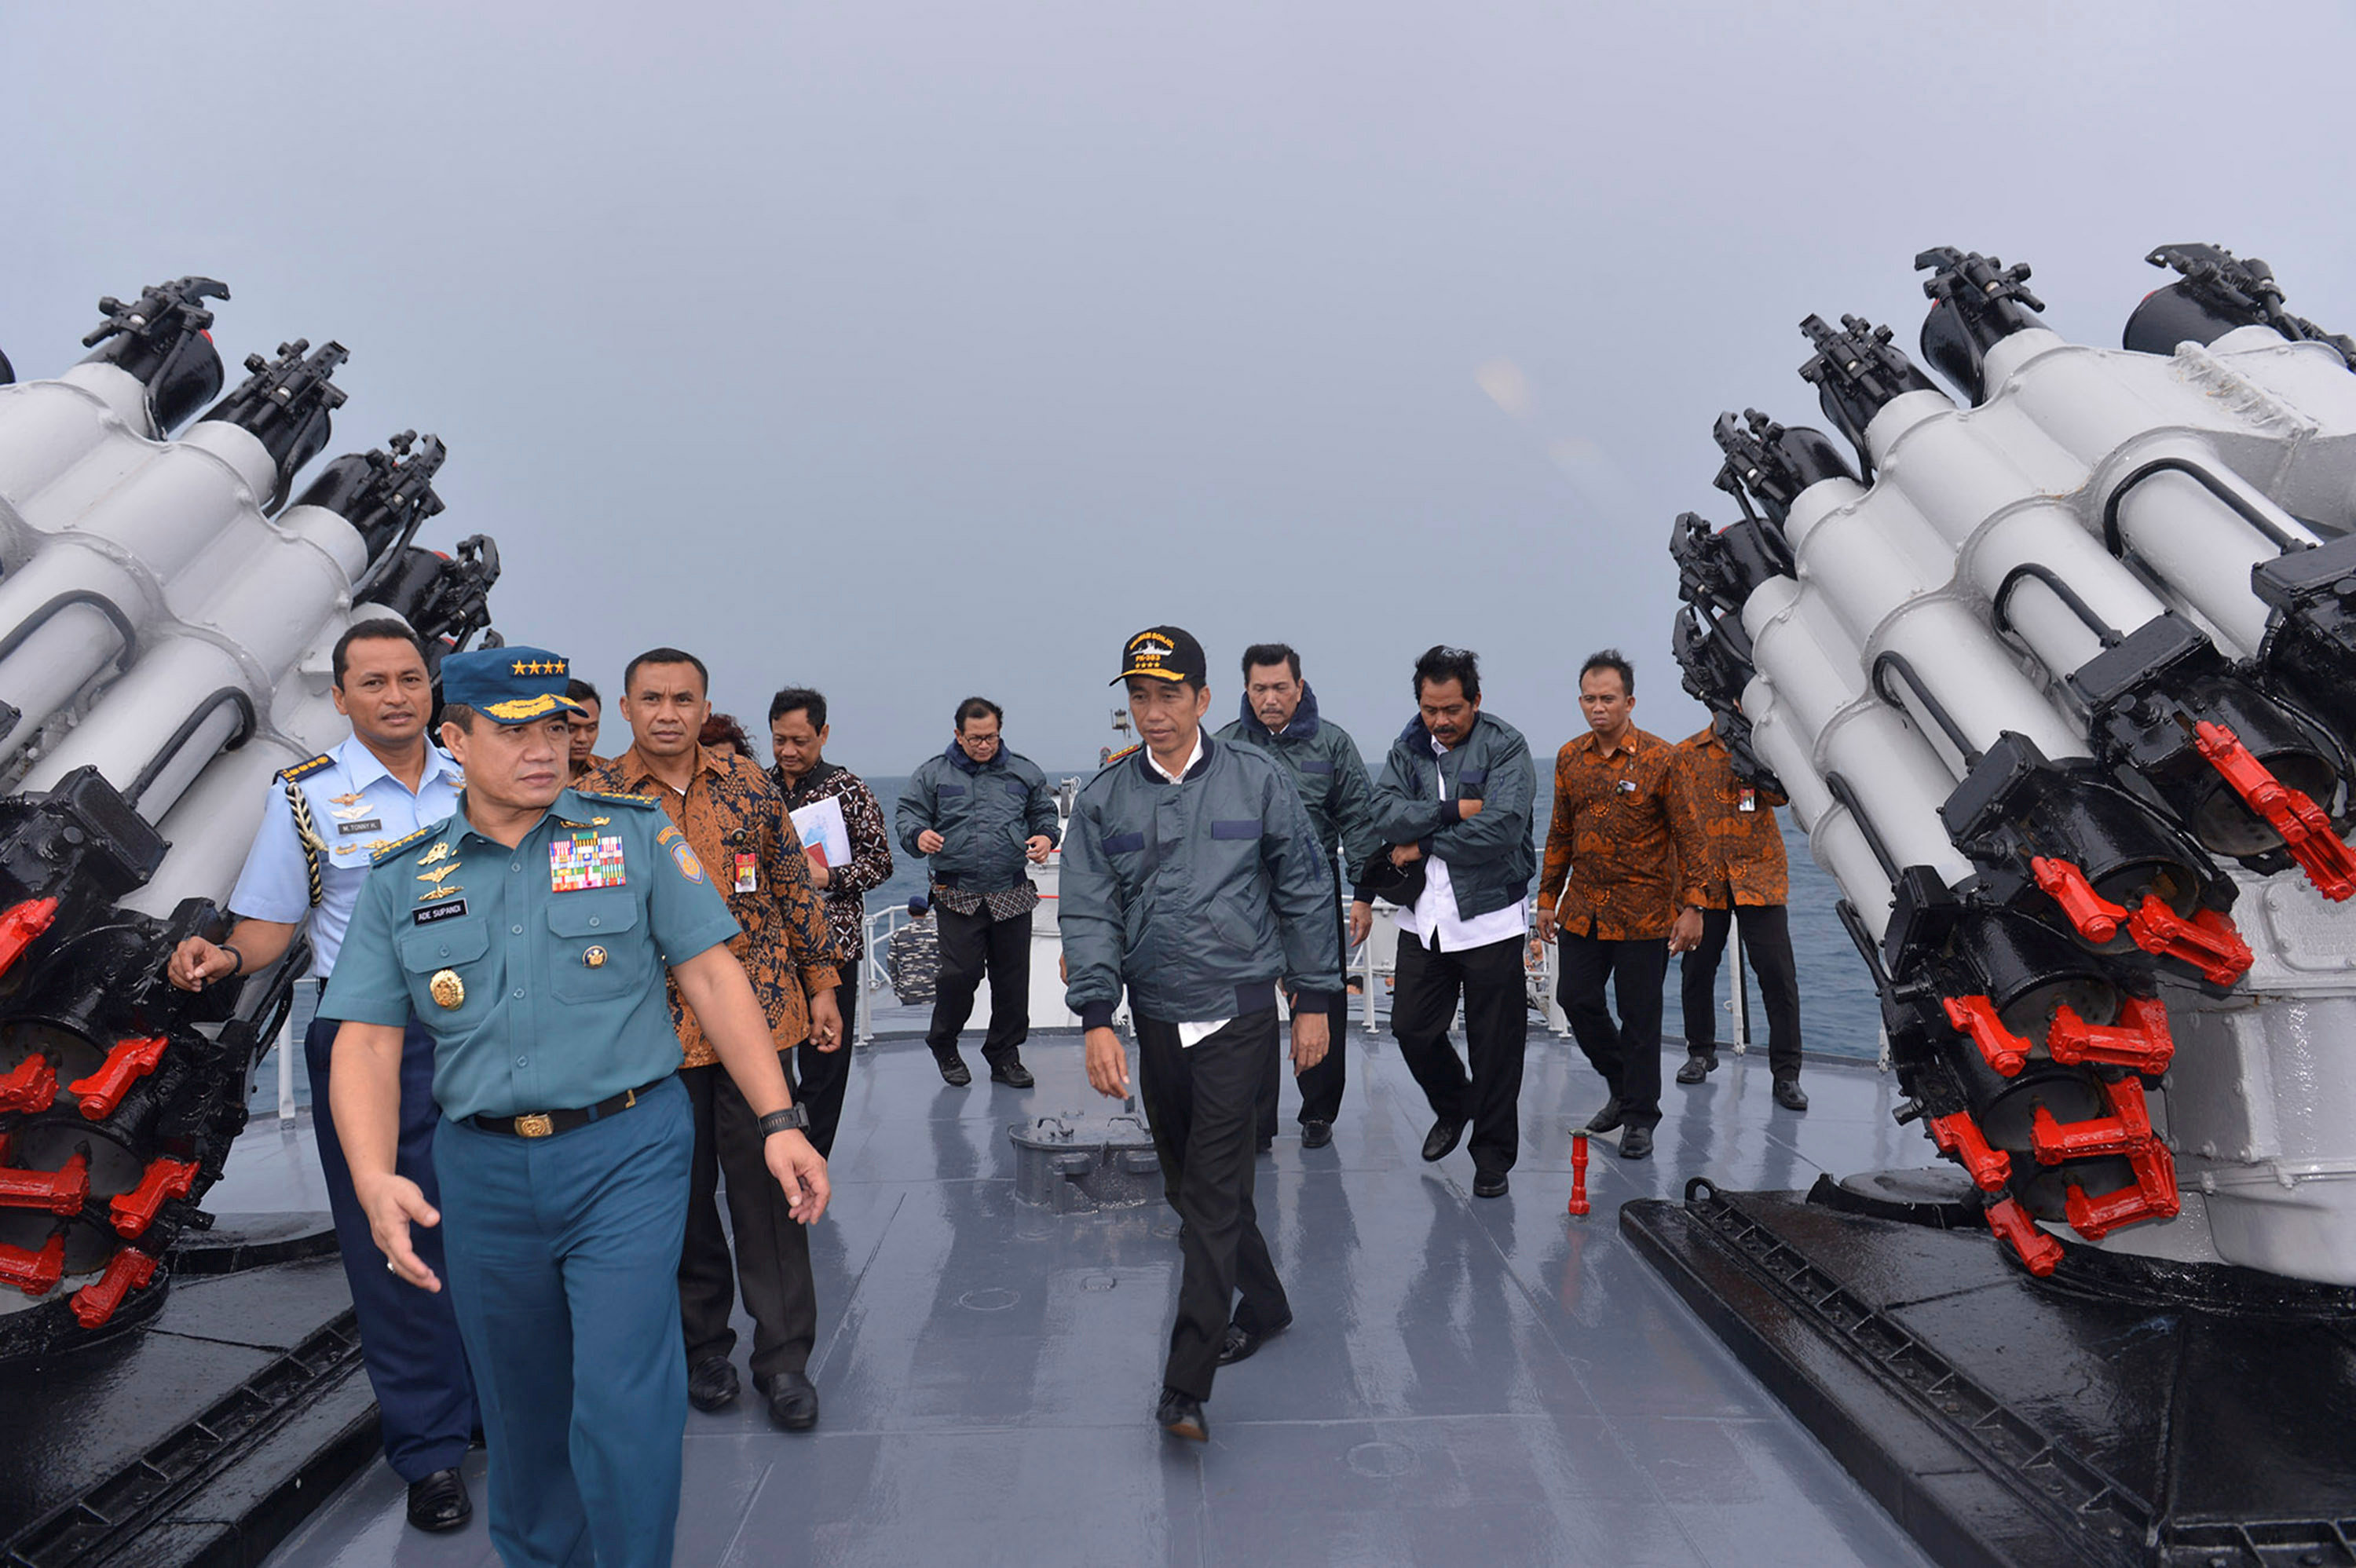 Indonesian President Joko Widodo walks on the deck of the Indonesian Navy ship KRI Imam Bonjol together with members of his Cabinet as the ship sails off the Natuna Islands in Riau Islands province on June 23. | REUTERS